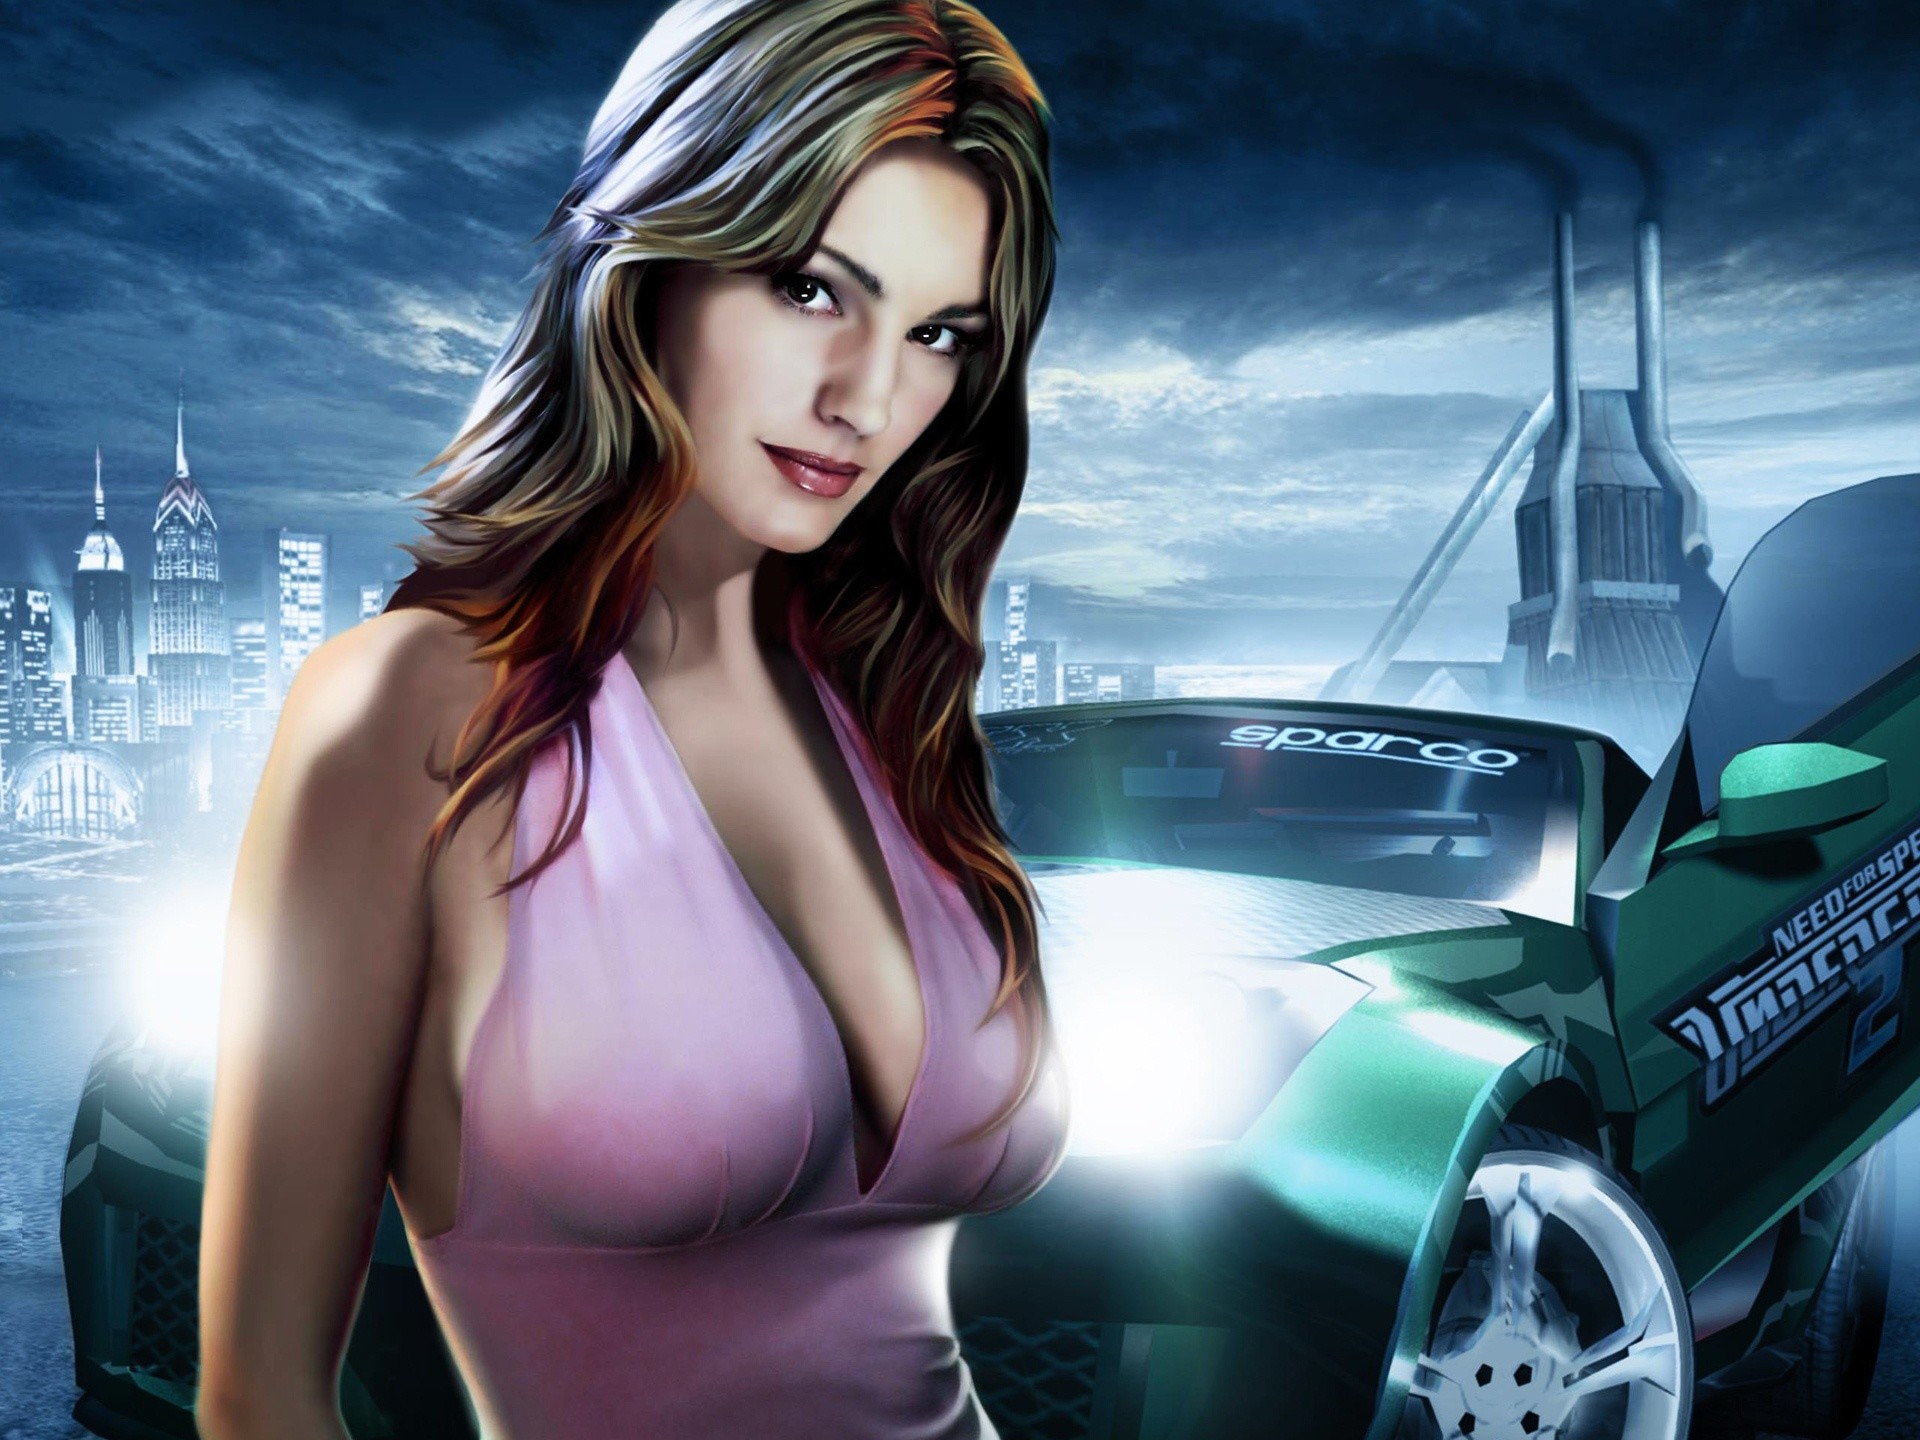 Need For Speed Girl